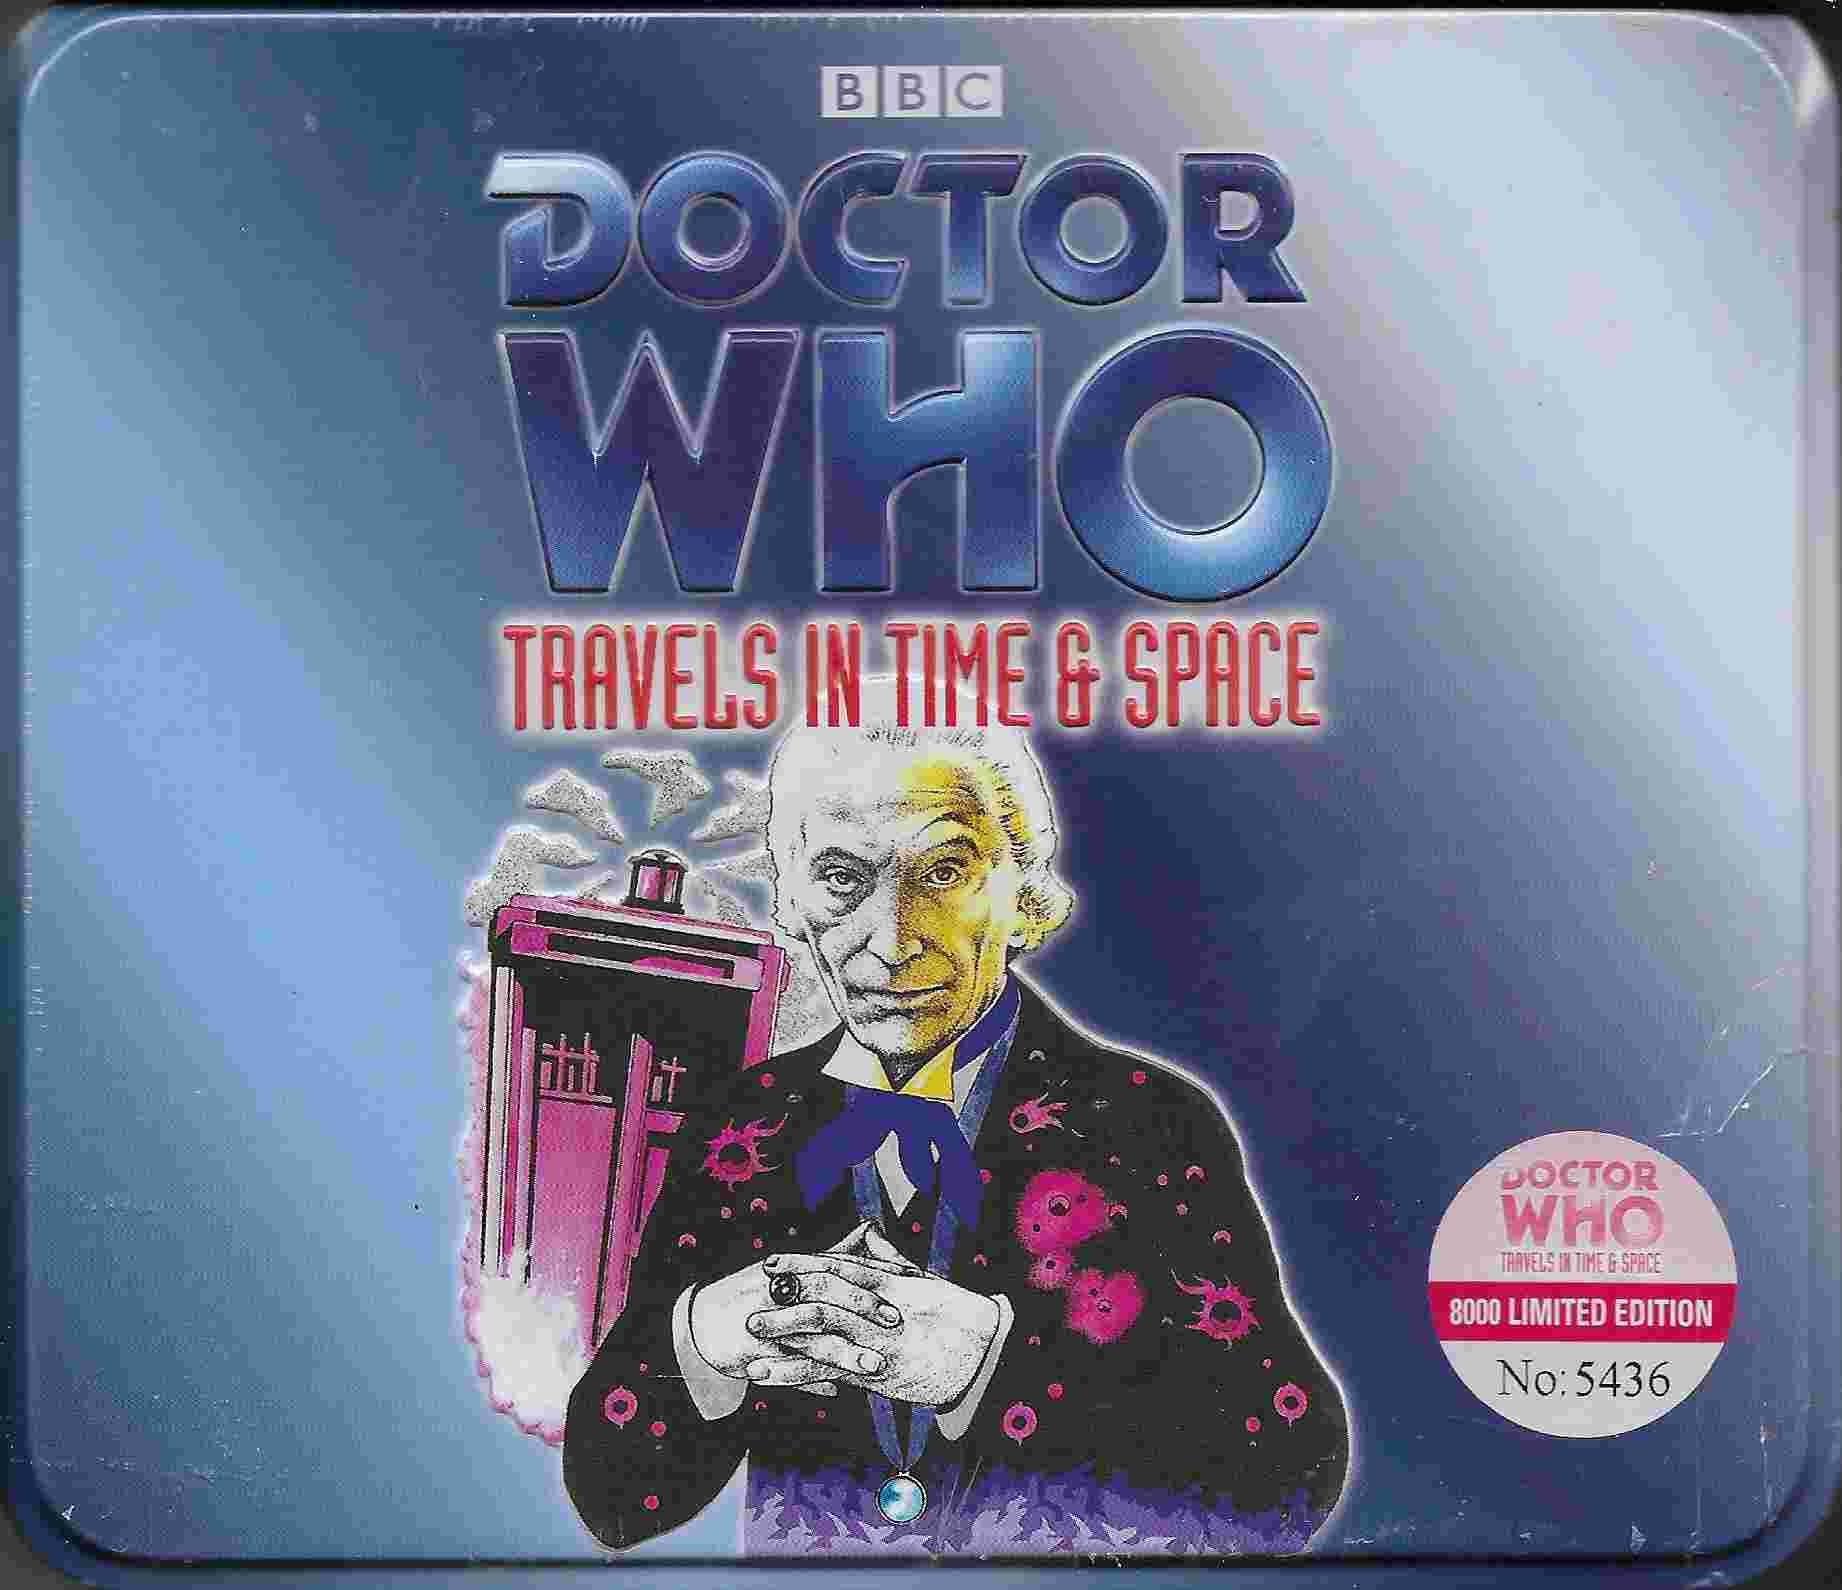 Picture of ISBN 0-563-50424-2 Doctor Who - Travels in time & space - Limited Edition by artist David Whitaker / BillStrutton from the BBC cds - Records and Tapes library